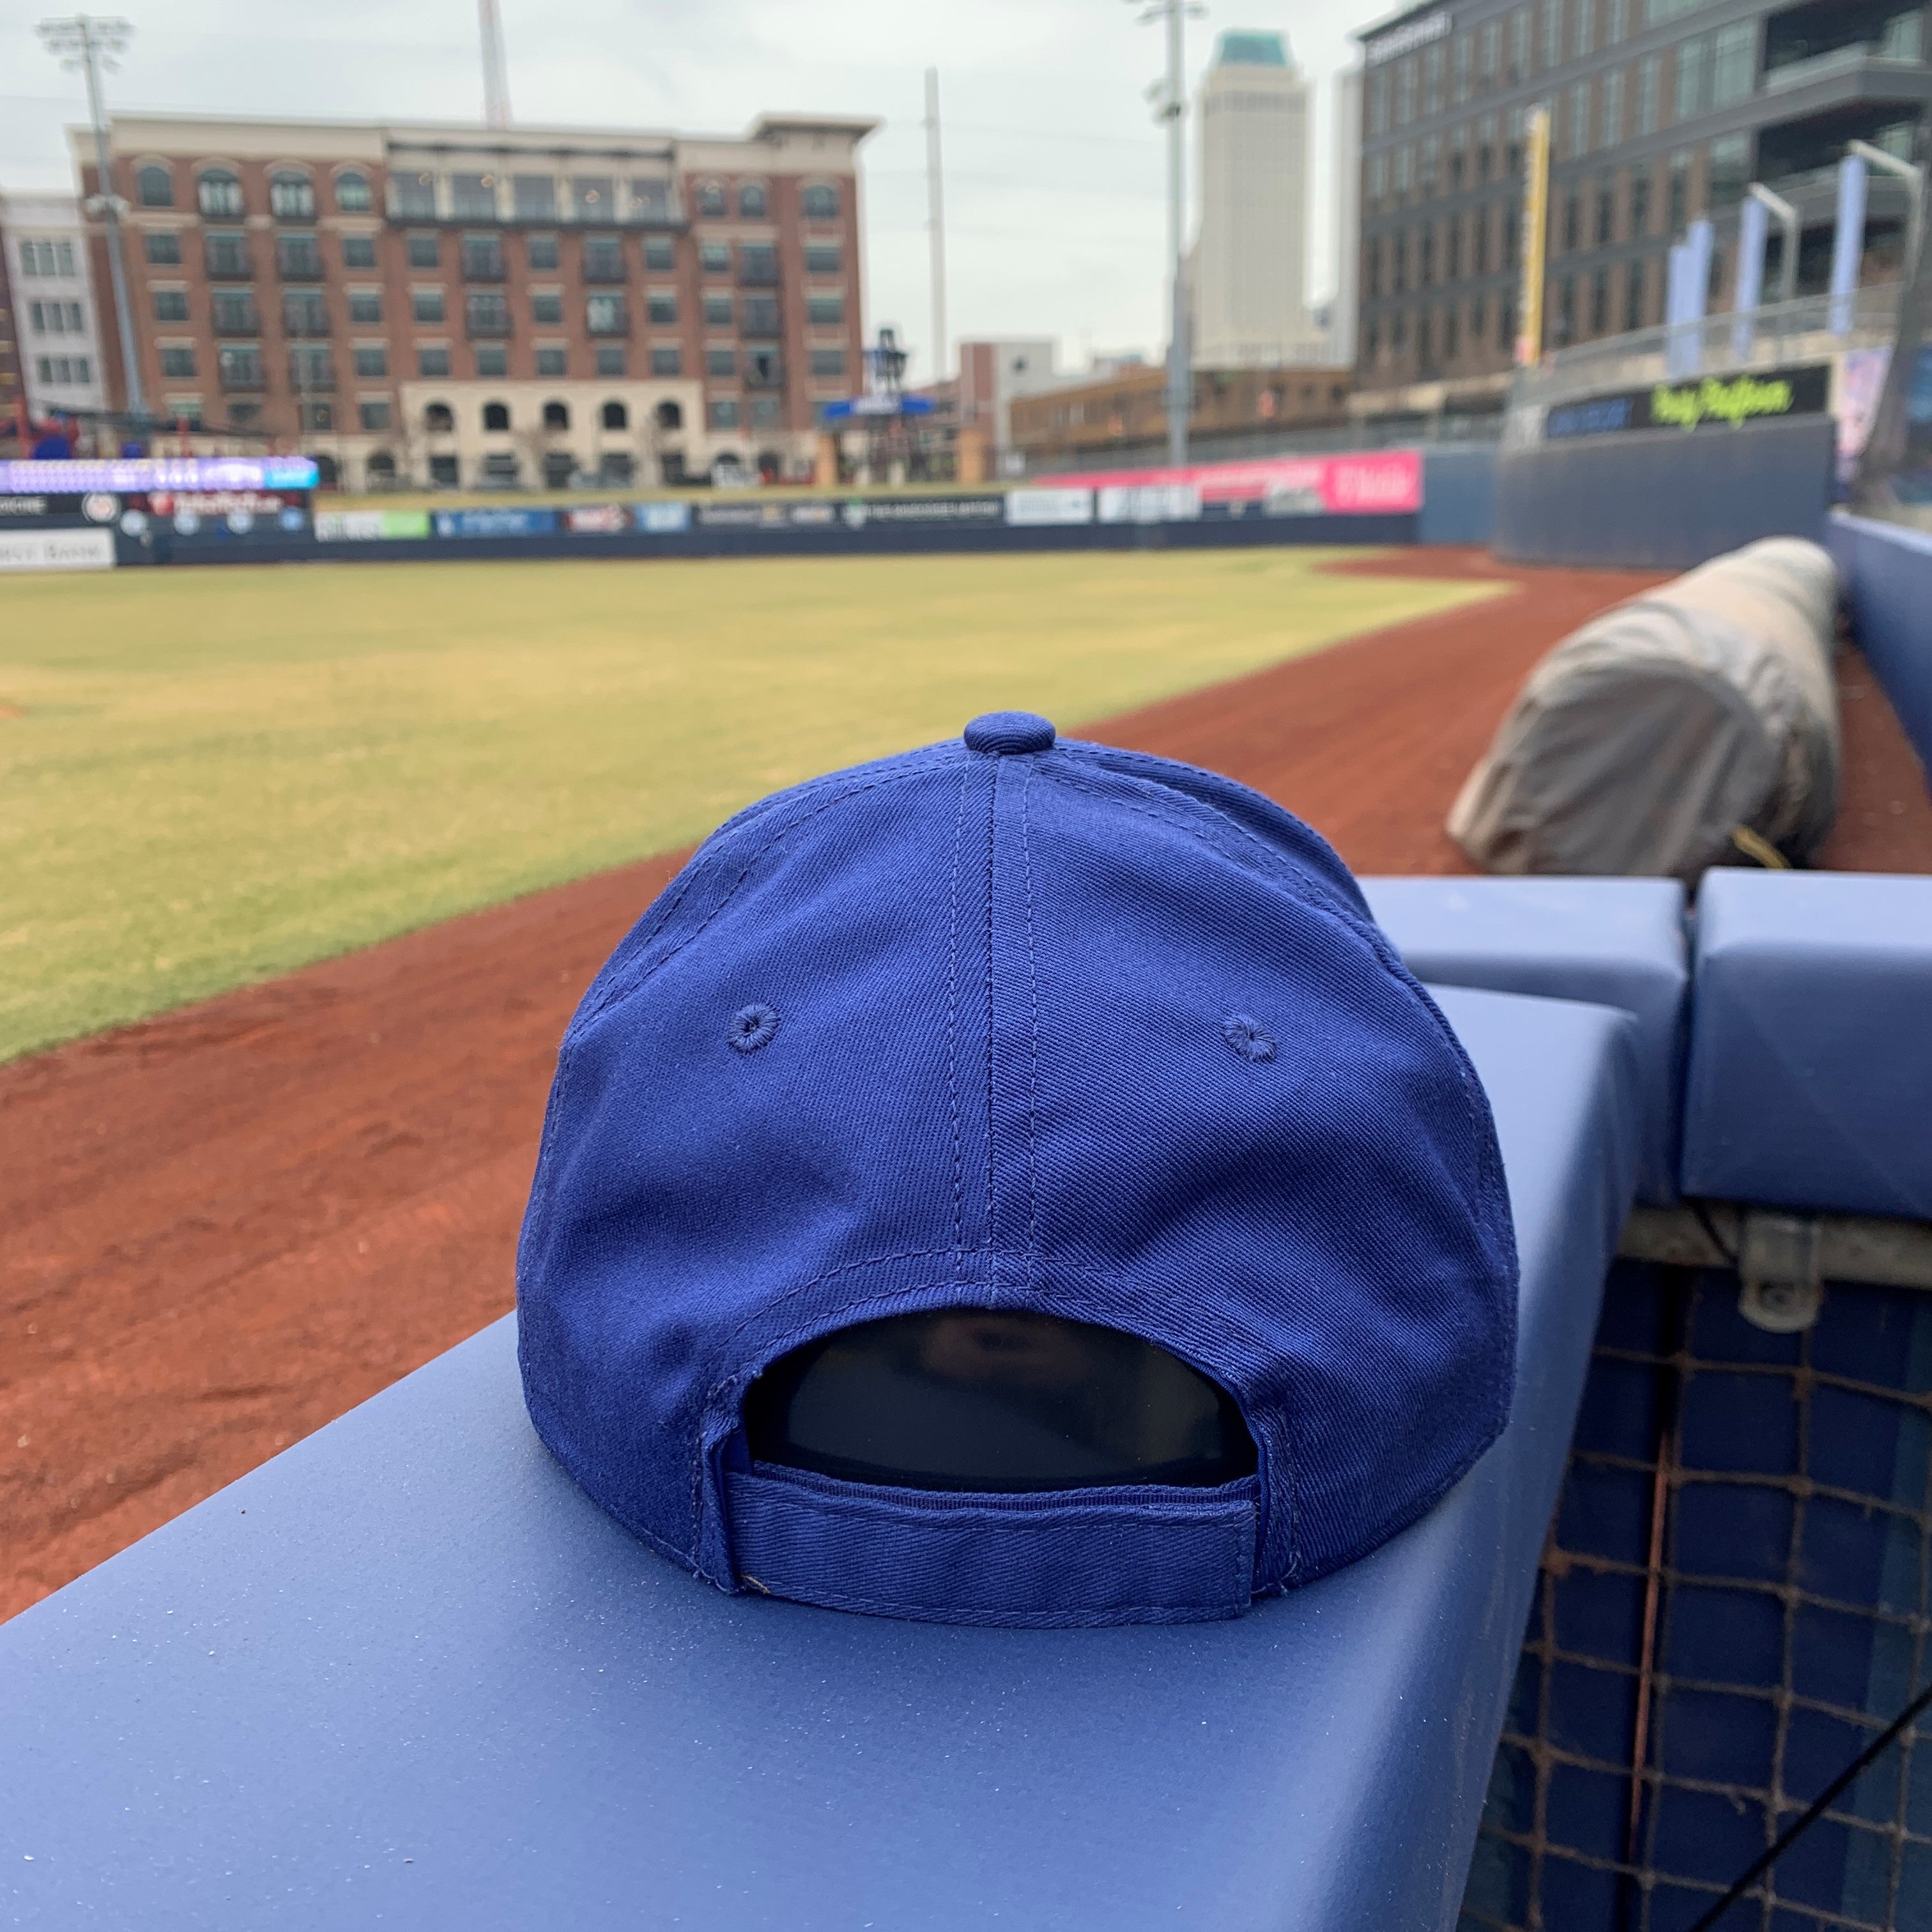 Noodlers Youth Velcro Adjustable Cap – Tulsa Drillers